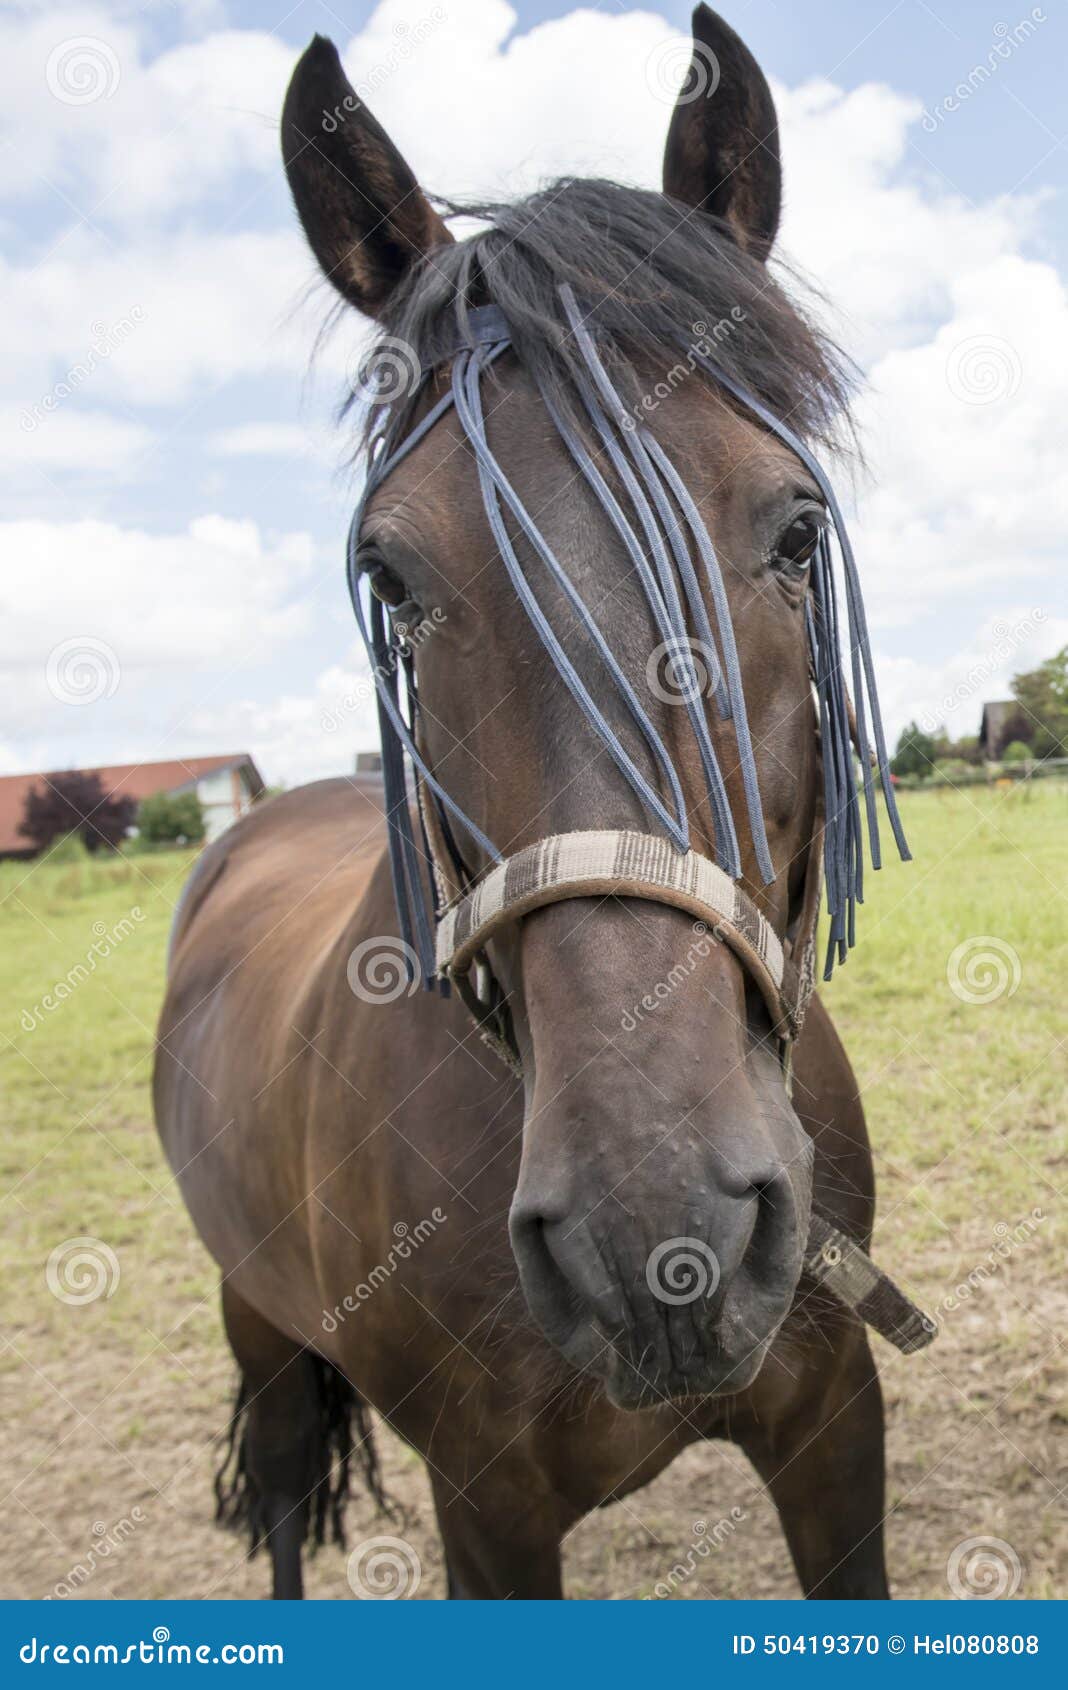 horse with fly-proofing